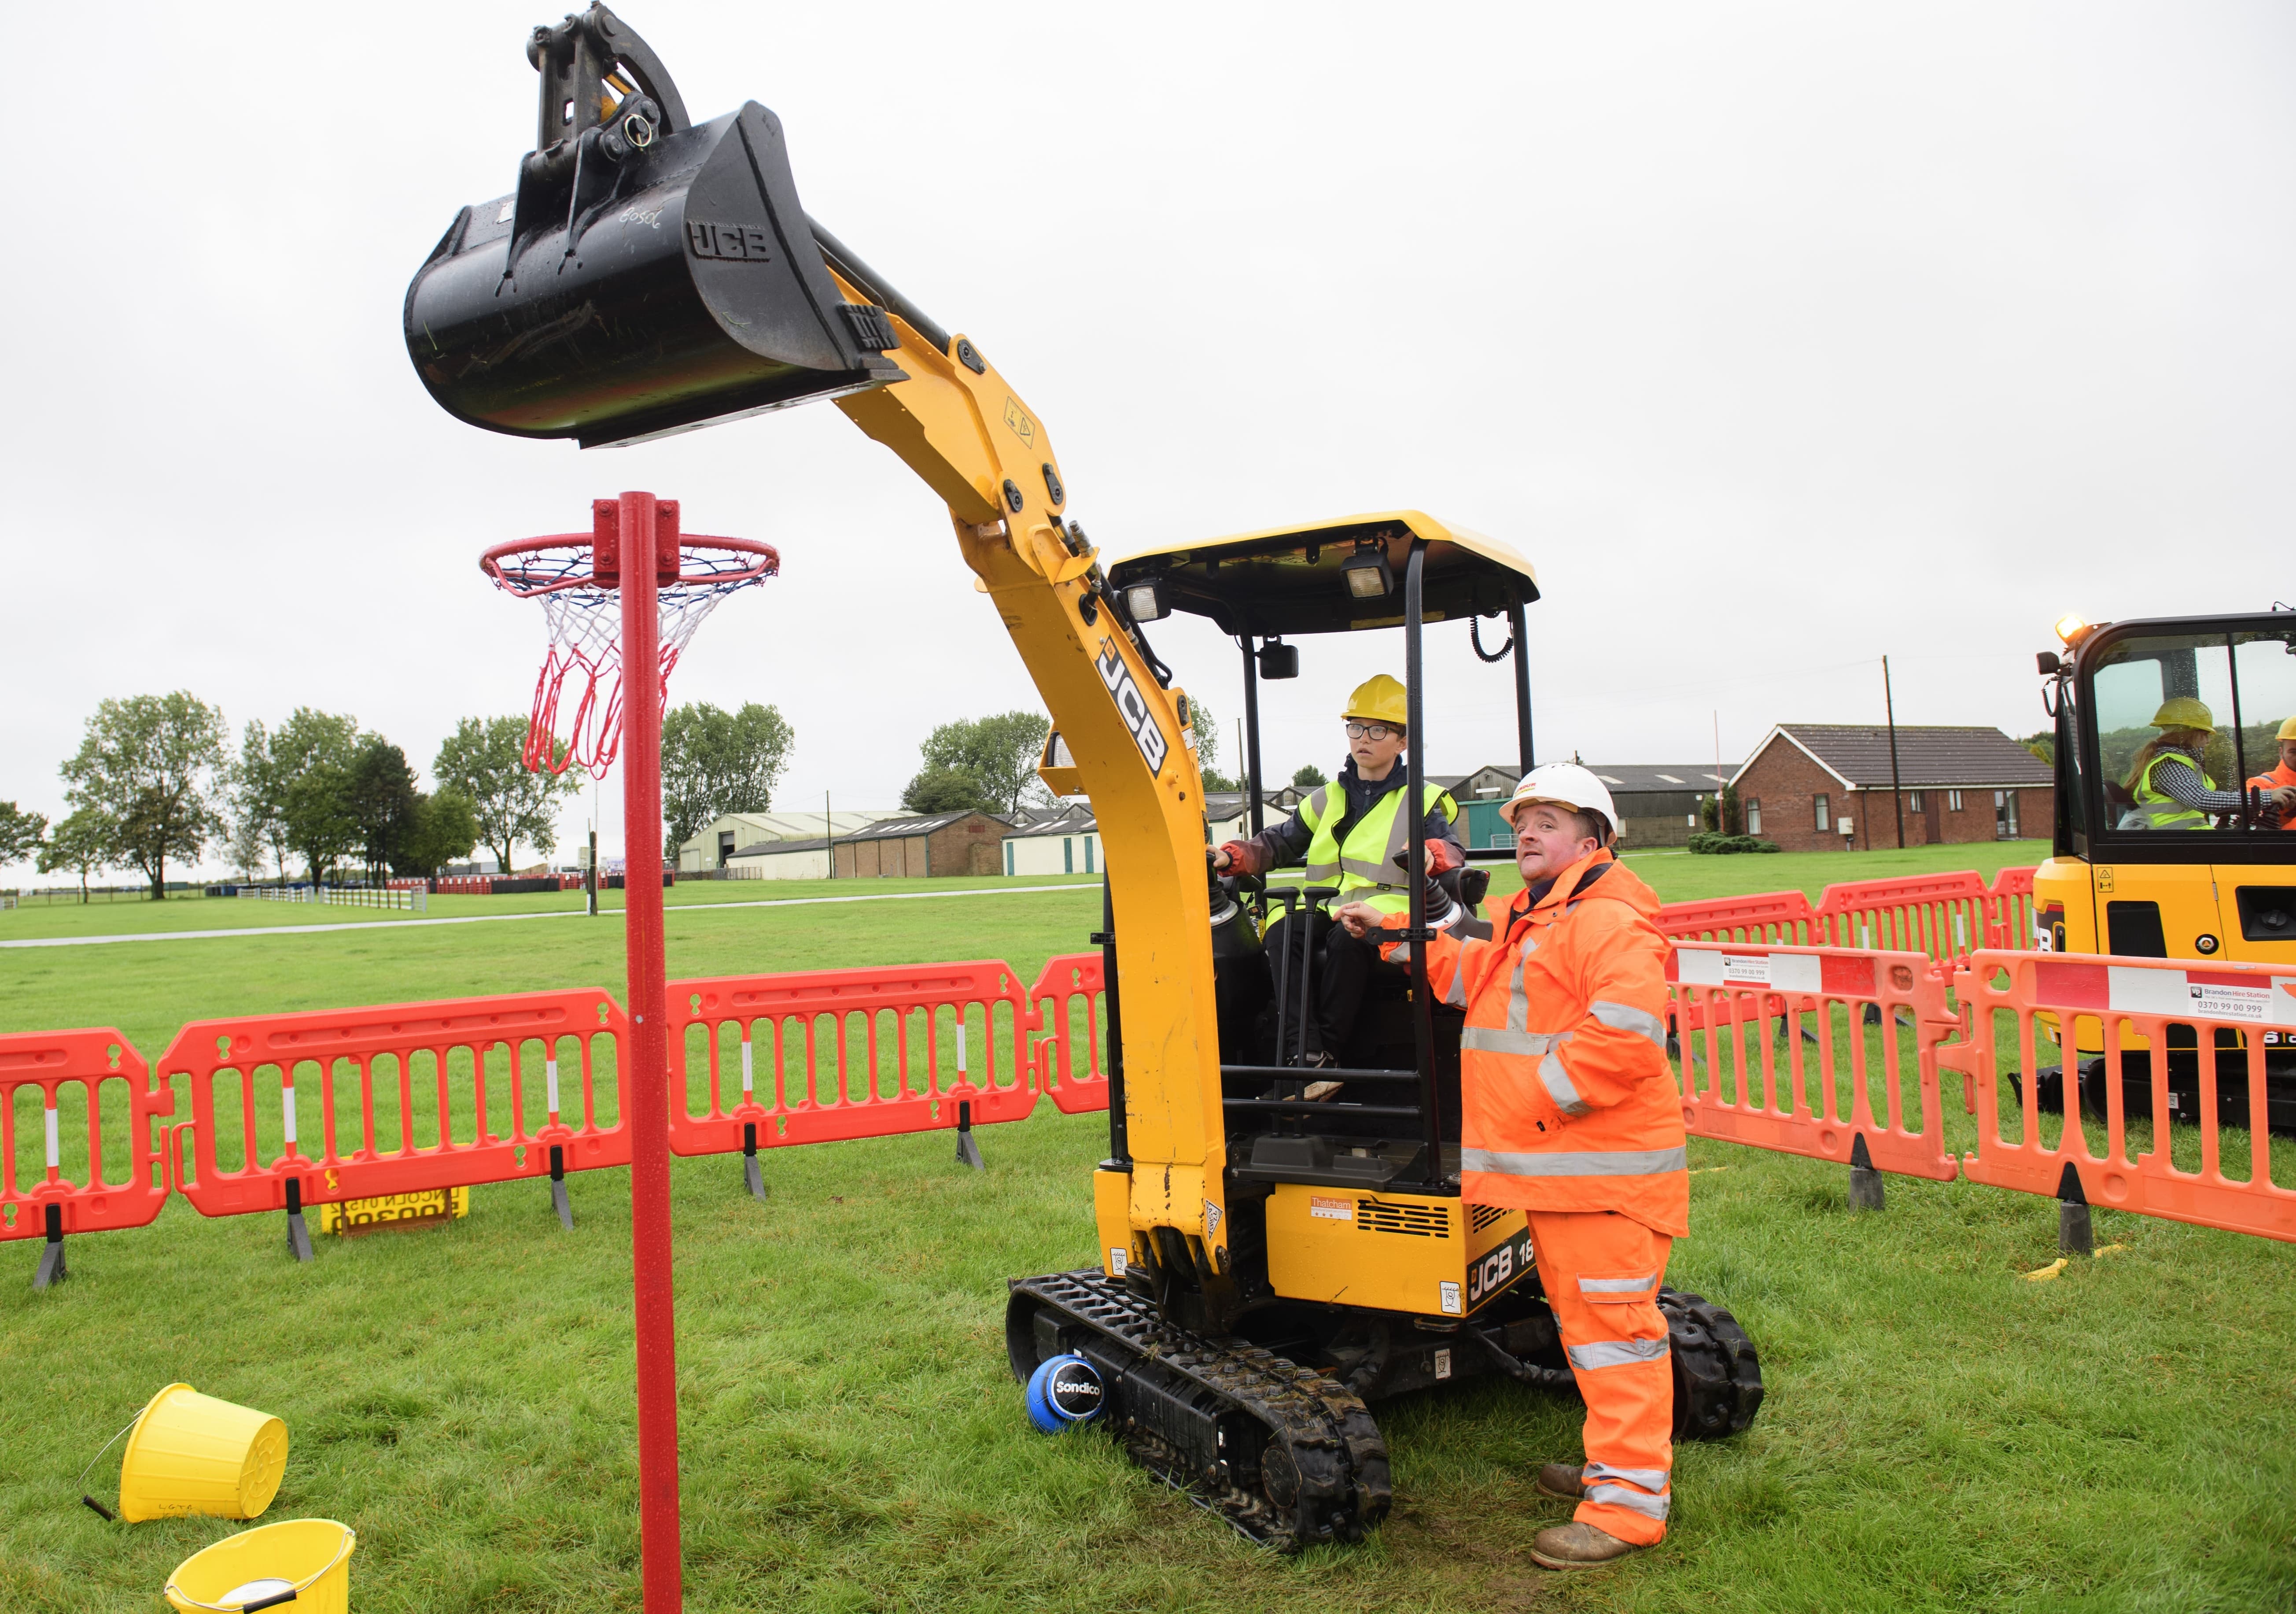 Young child operating a yellow JCB digger with man in orange high clothing supervising